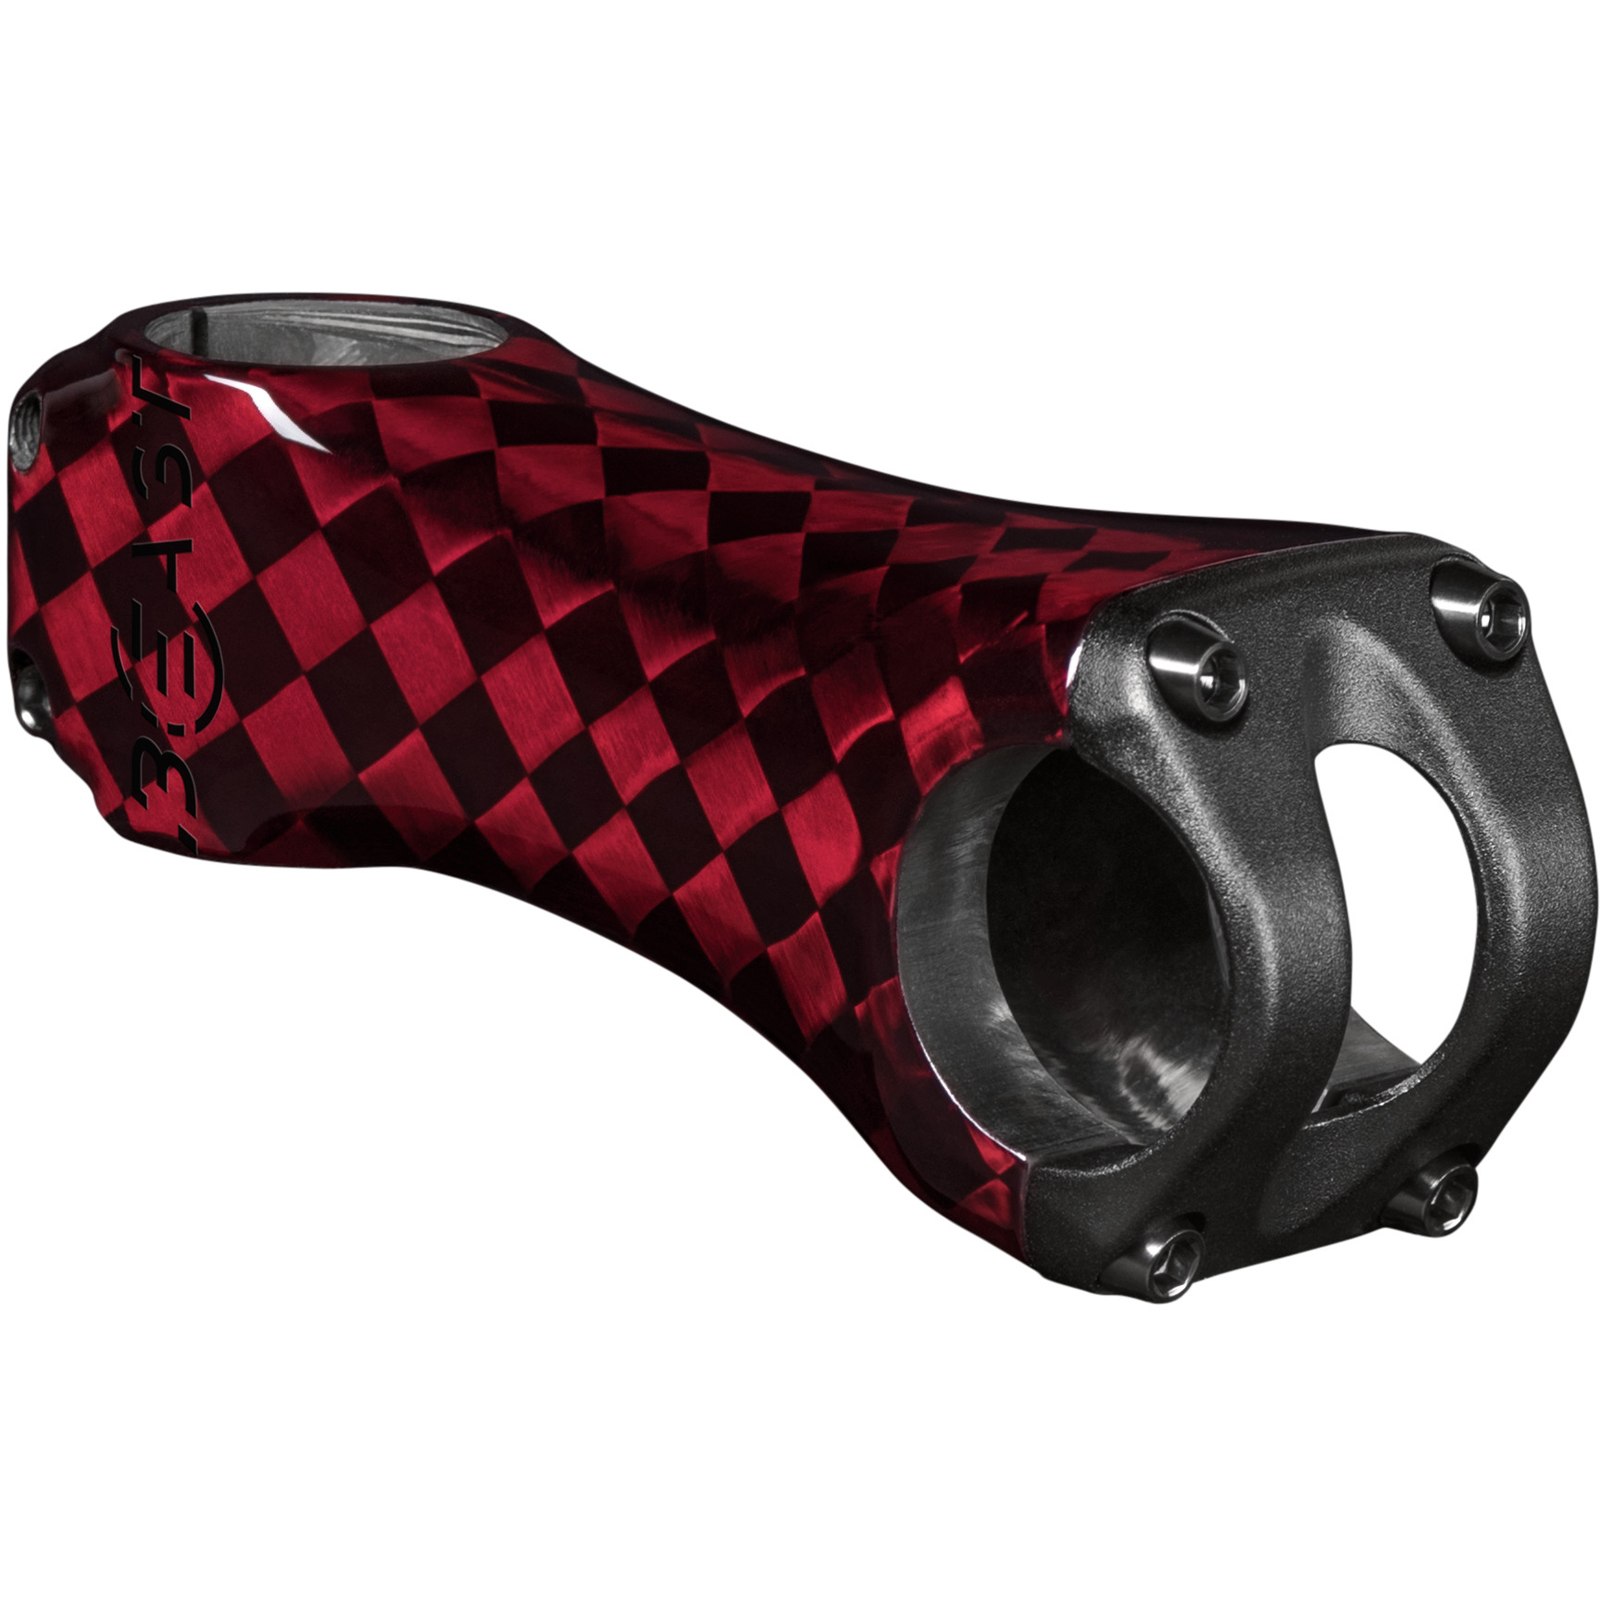 Image of Beast Components Road Carbon Stem 31.8mm - 6° - SQUARE red